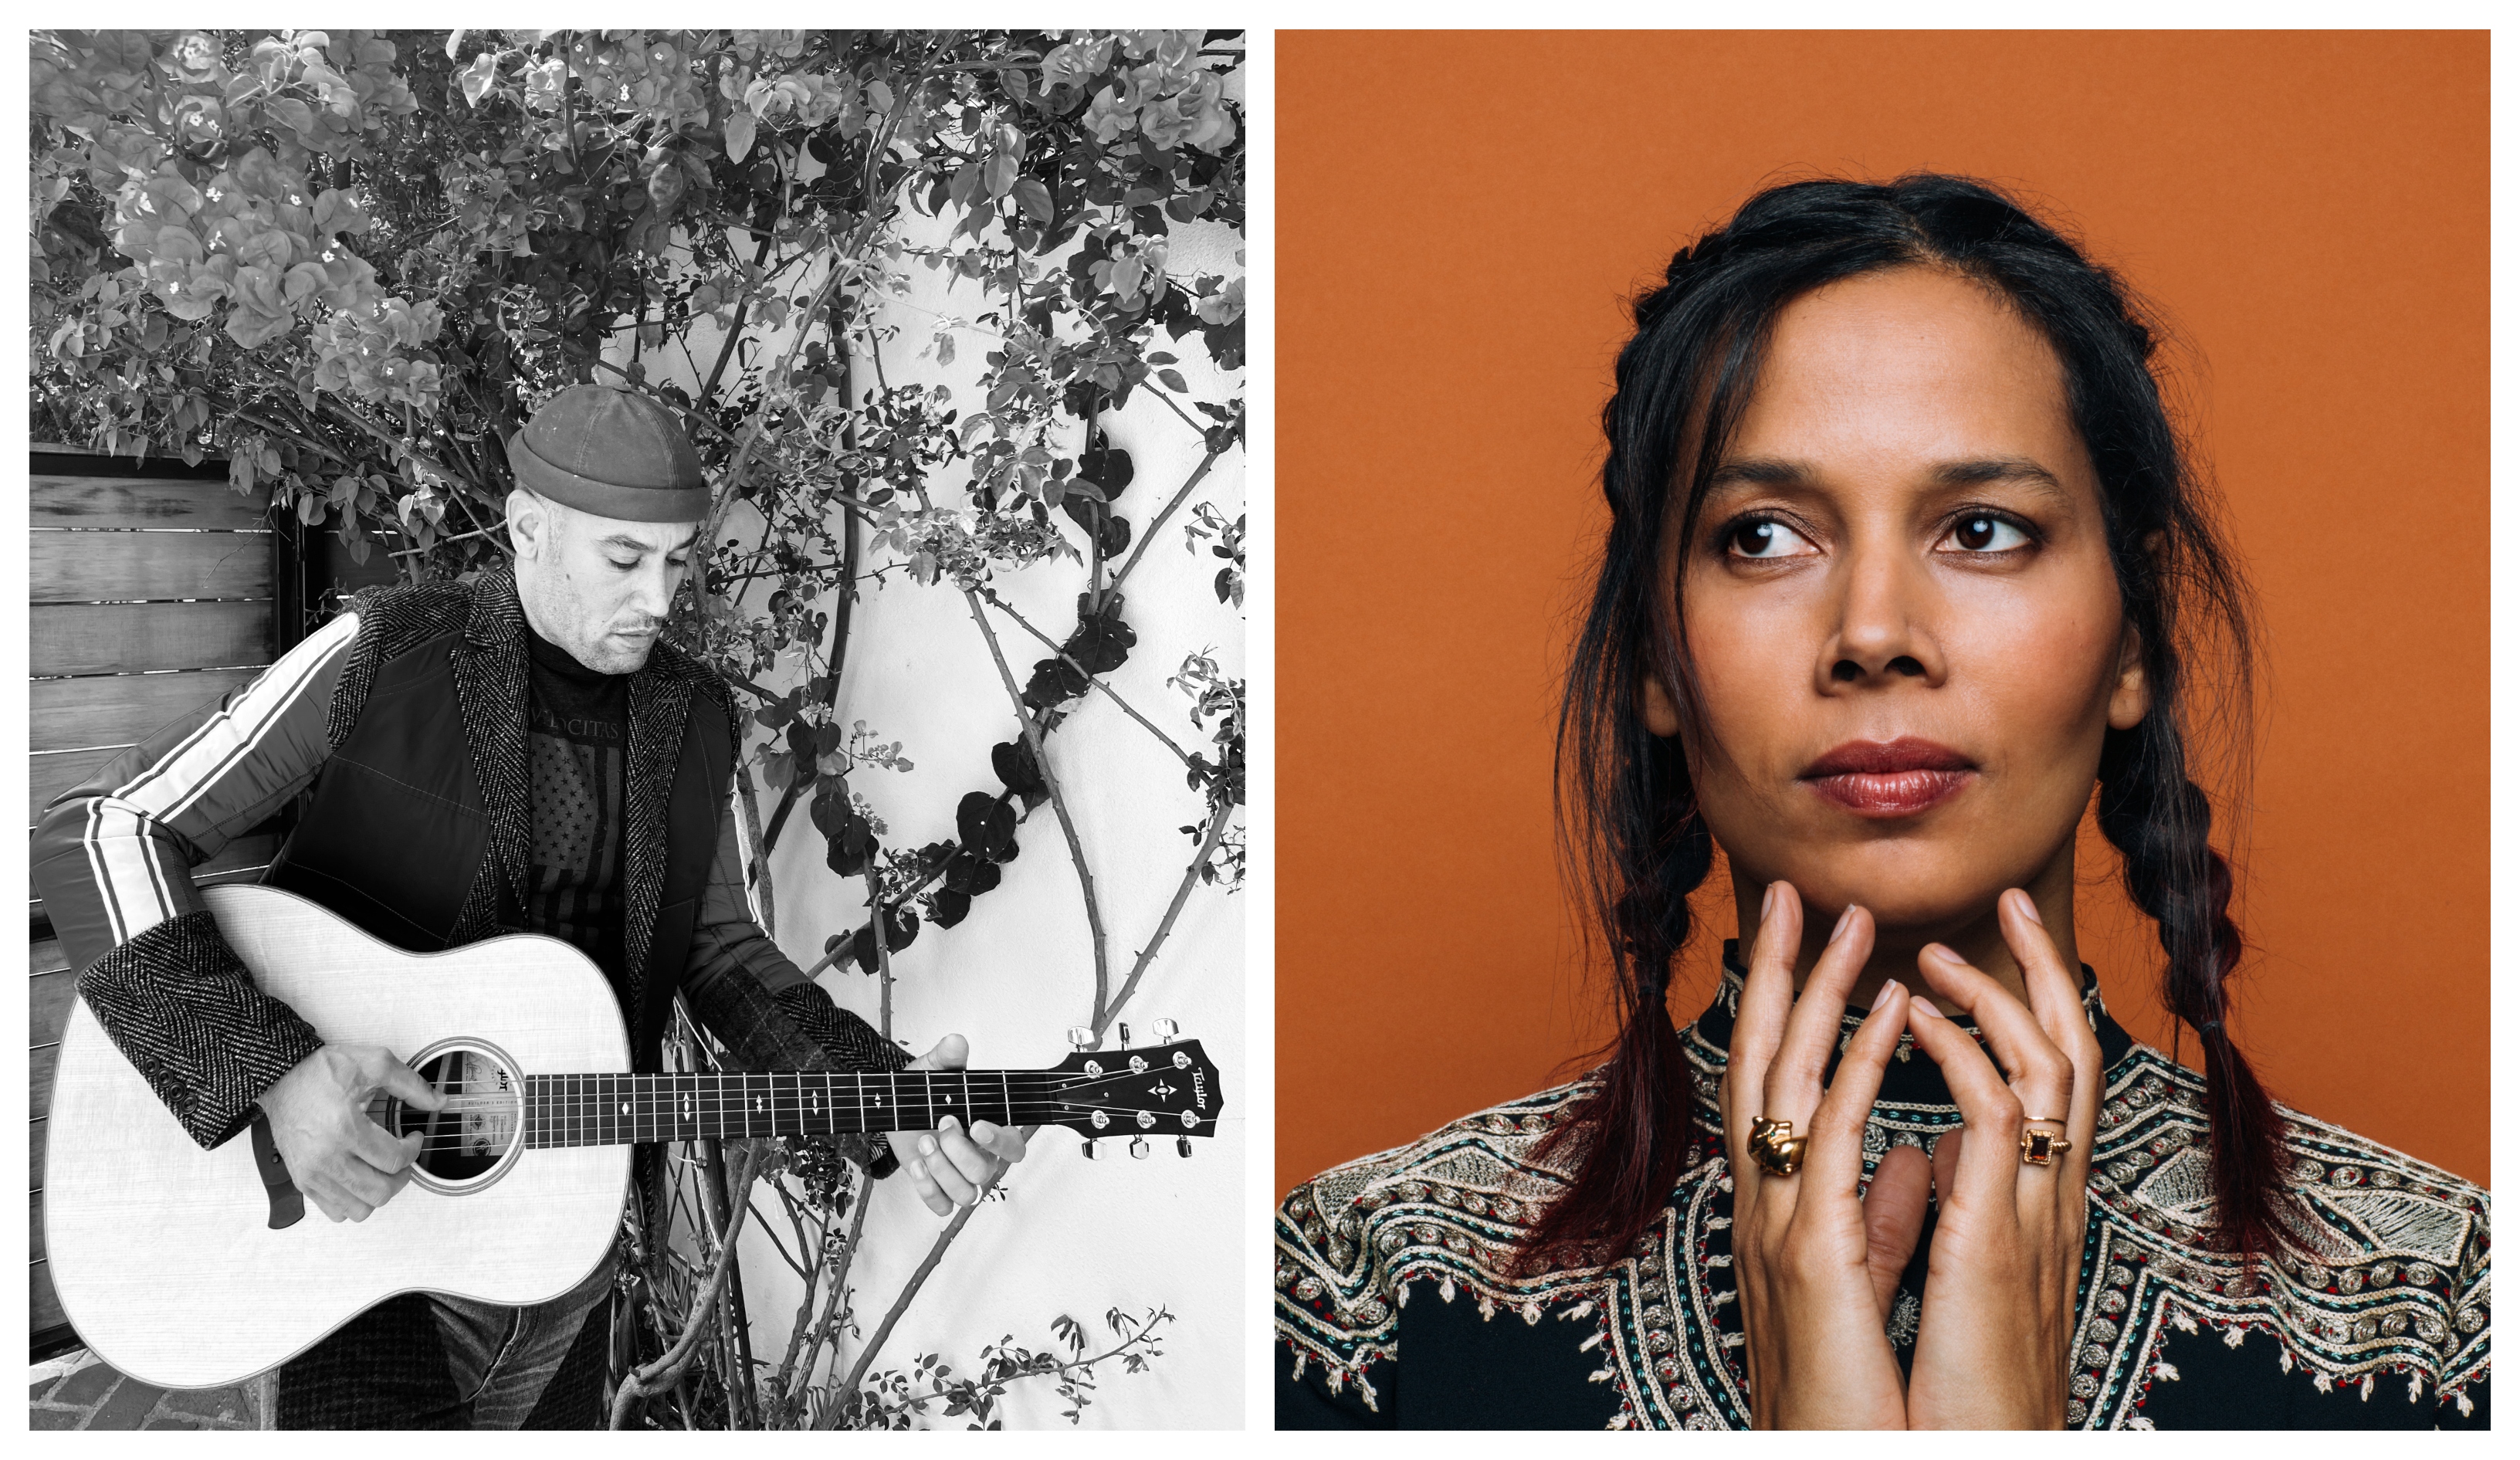 Hours After Winning A Pulitzer Prize, Rhiannon Giddens Reveals New LP